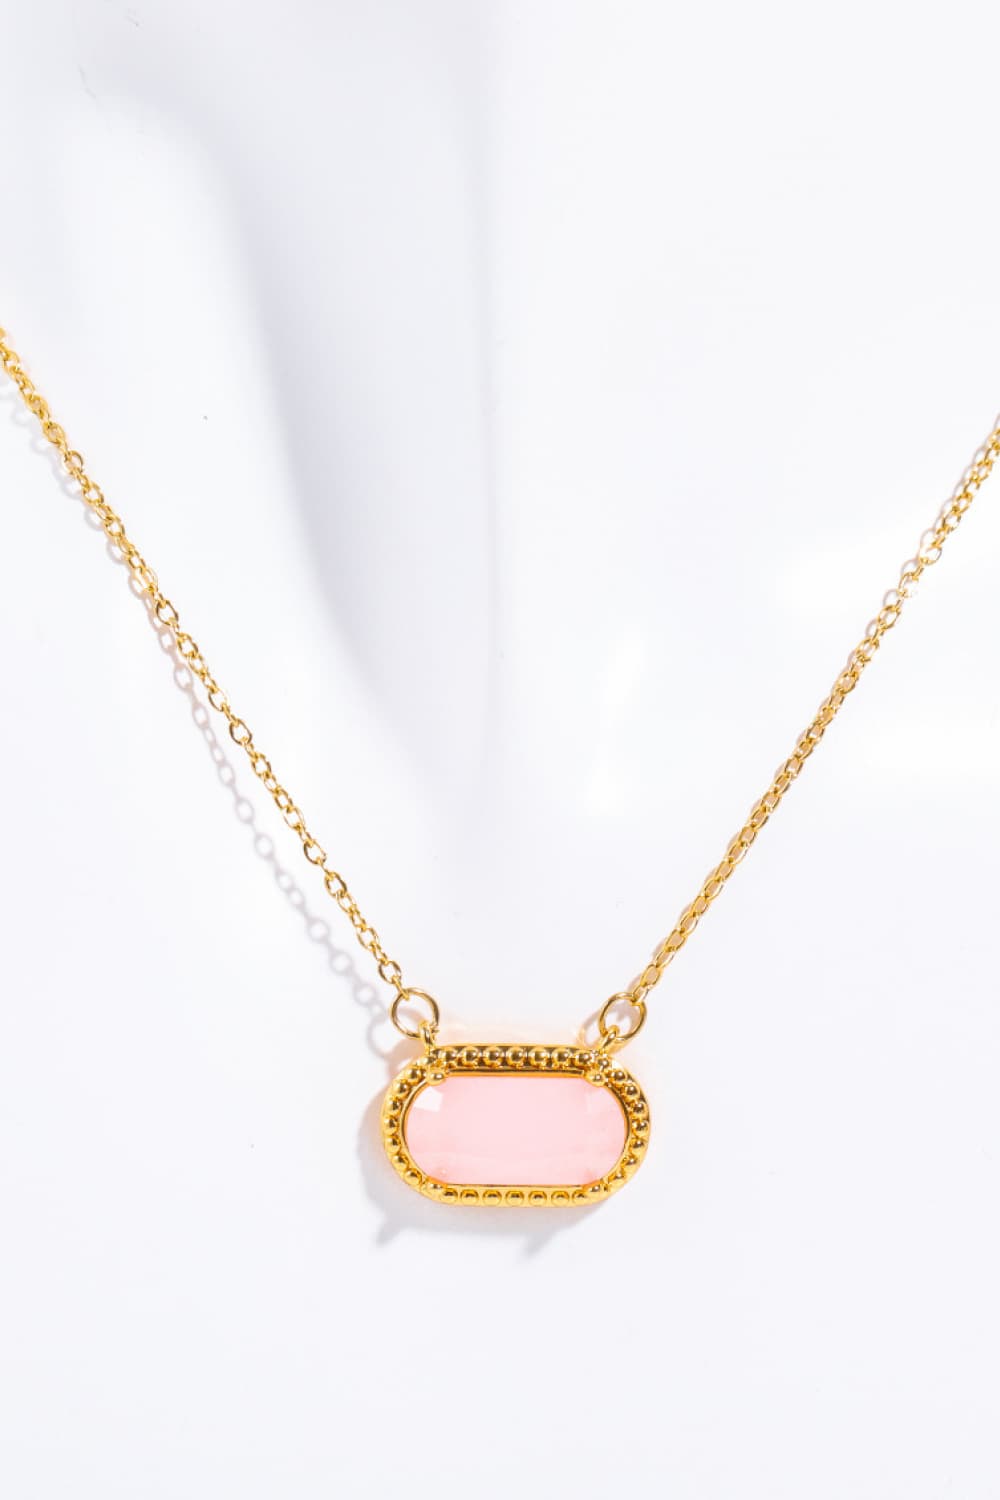 Trendsi Cupid Beauty Supplies Blush Pink / One Size Women Necklace Copper 14K Gold Pleated Pendant Necklace